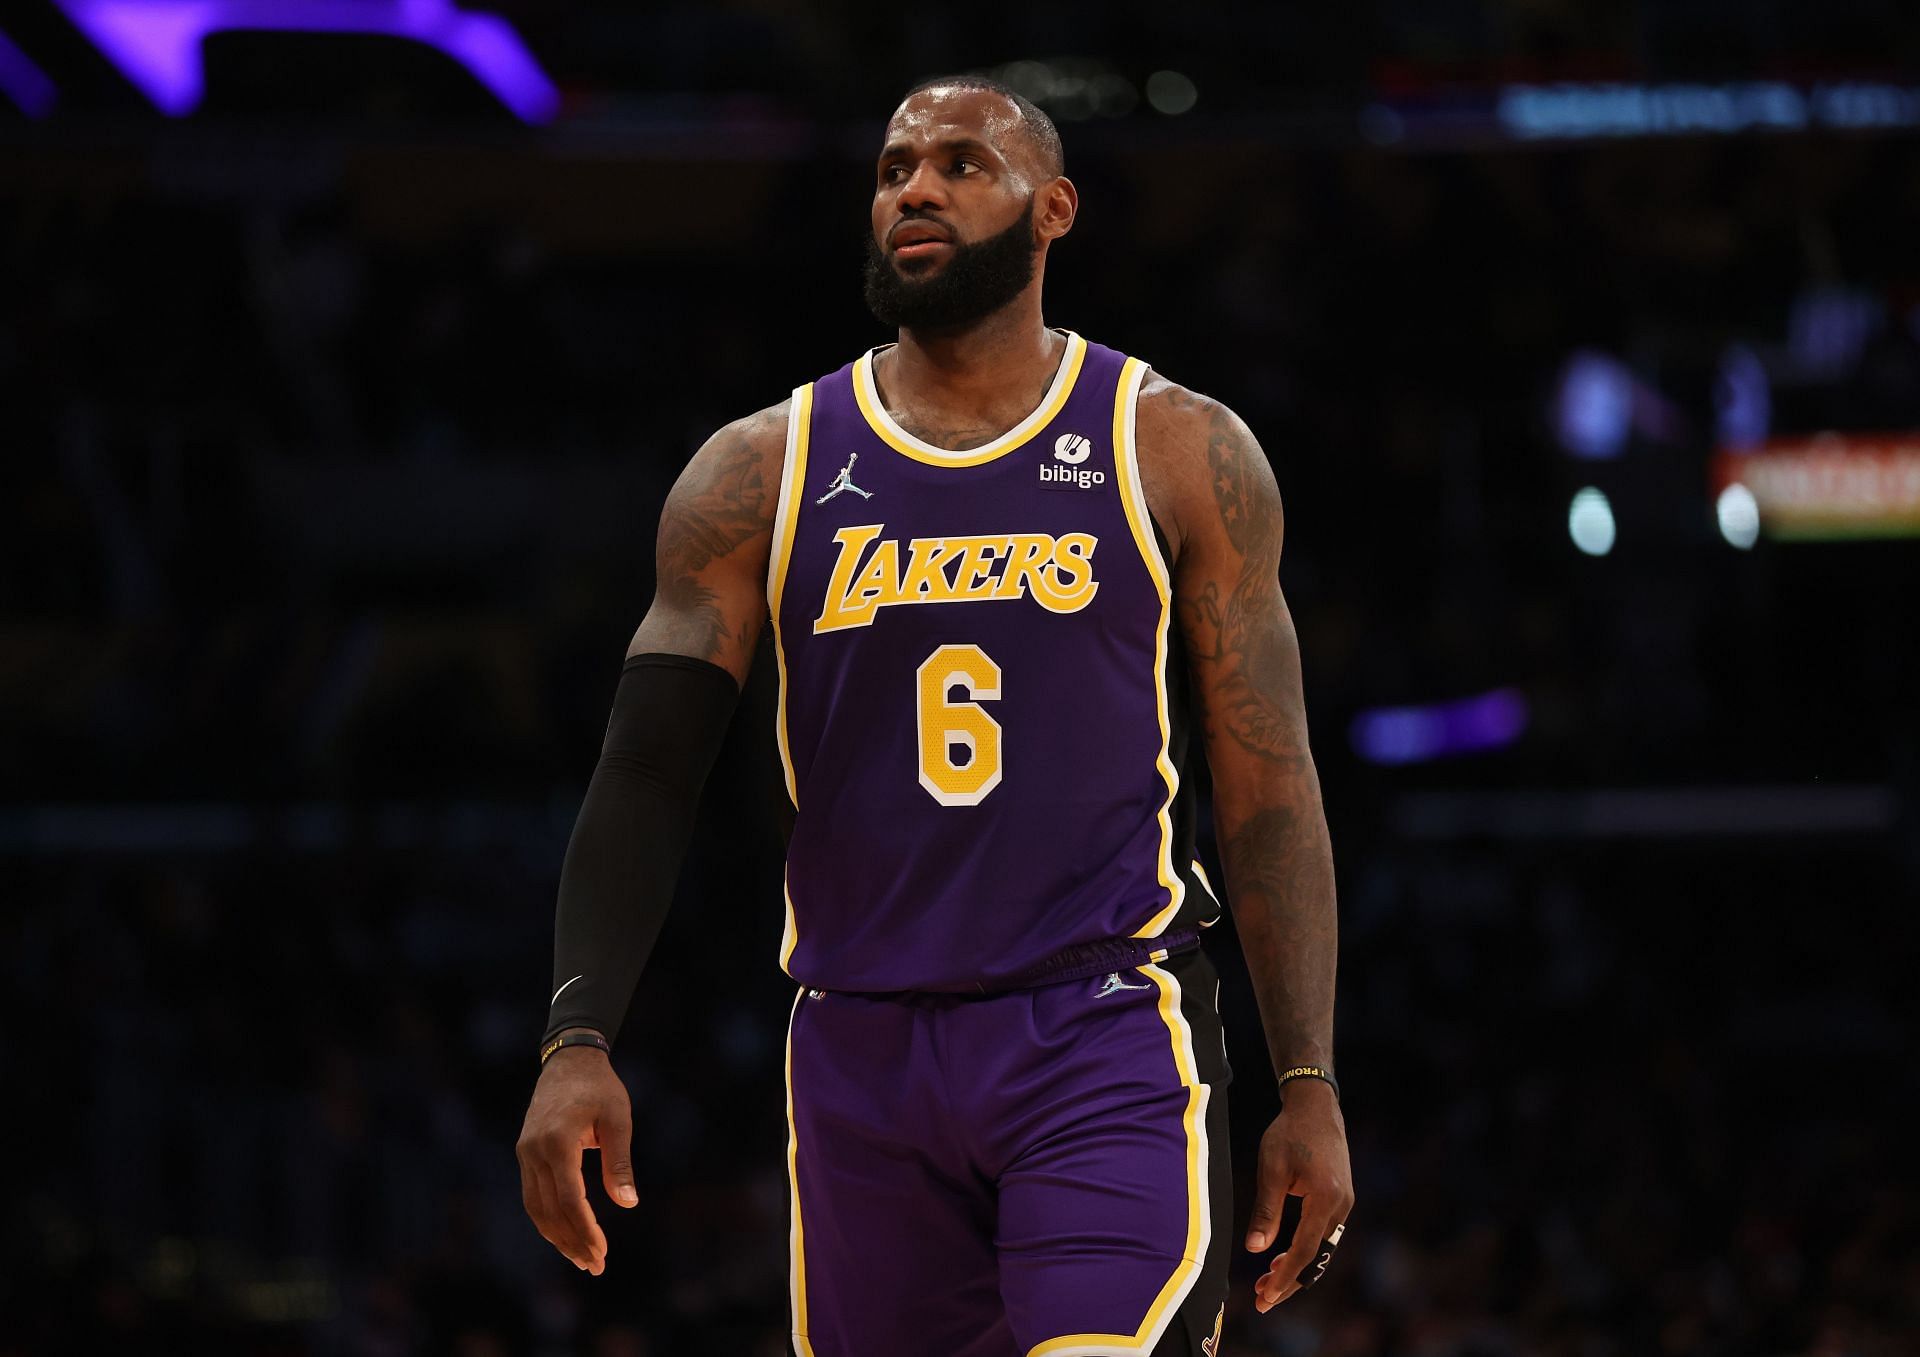 The basketball world waits for the return of Los Angeles Laker star LeBron James